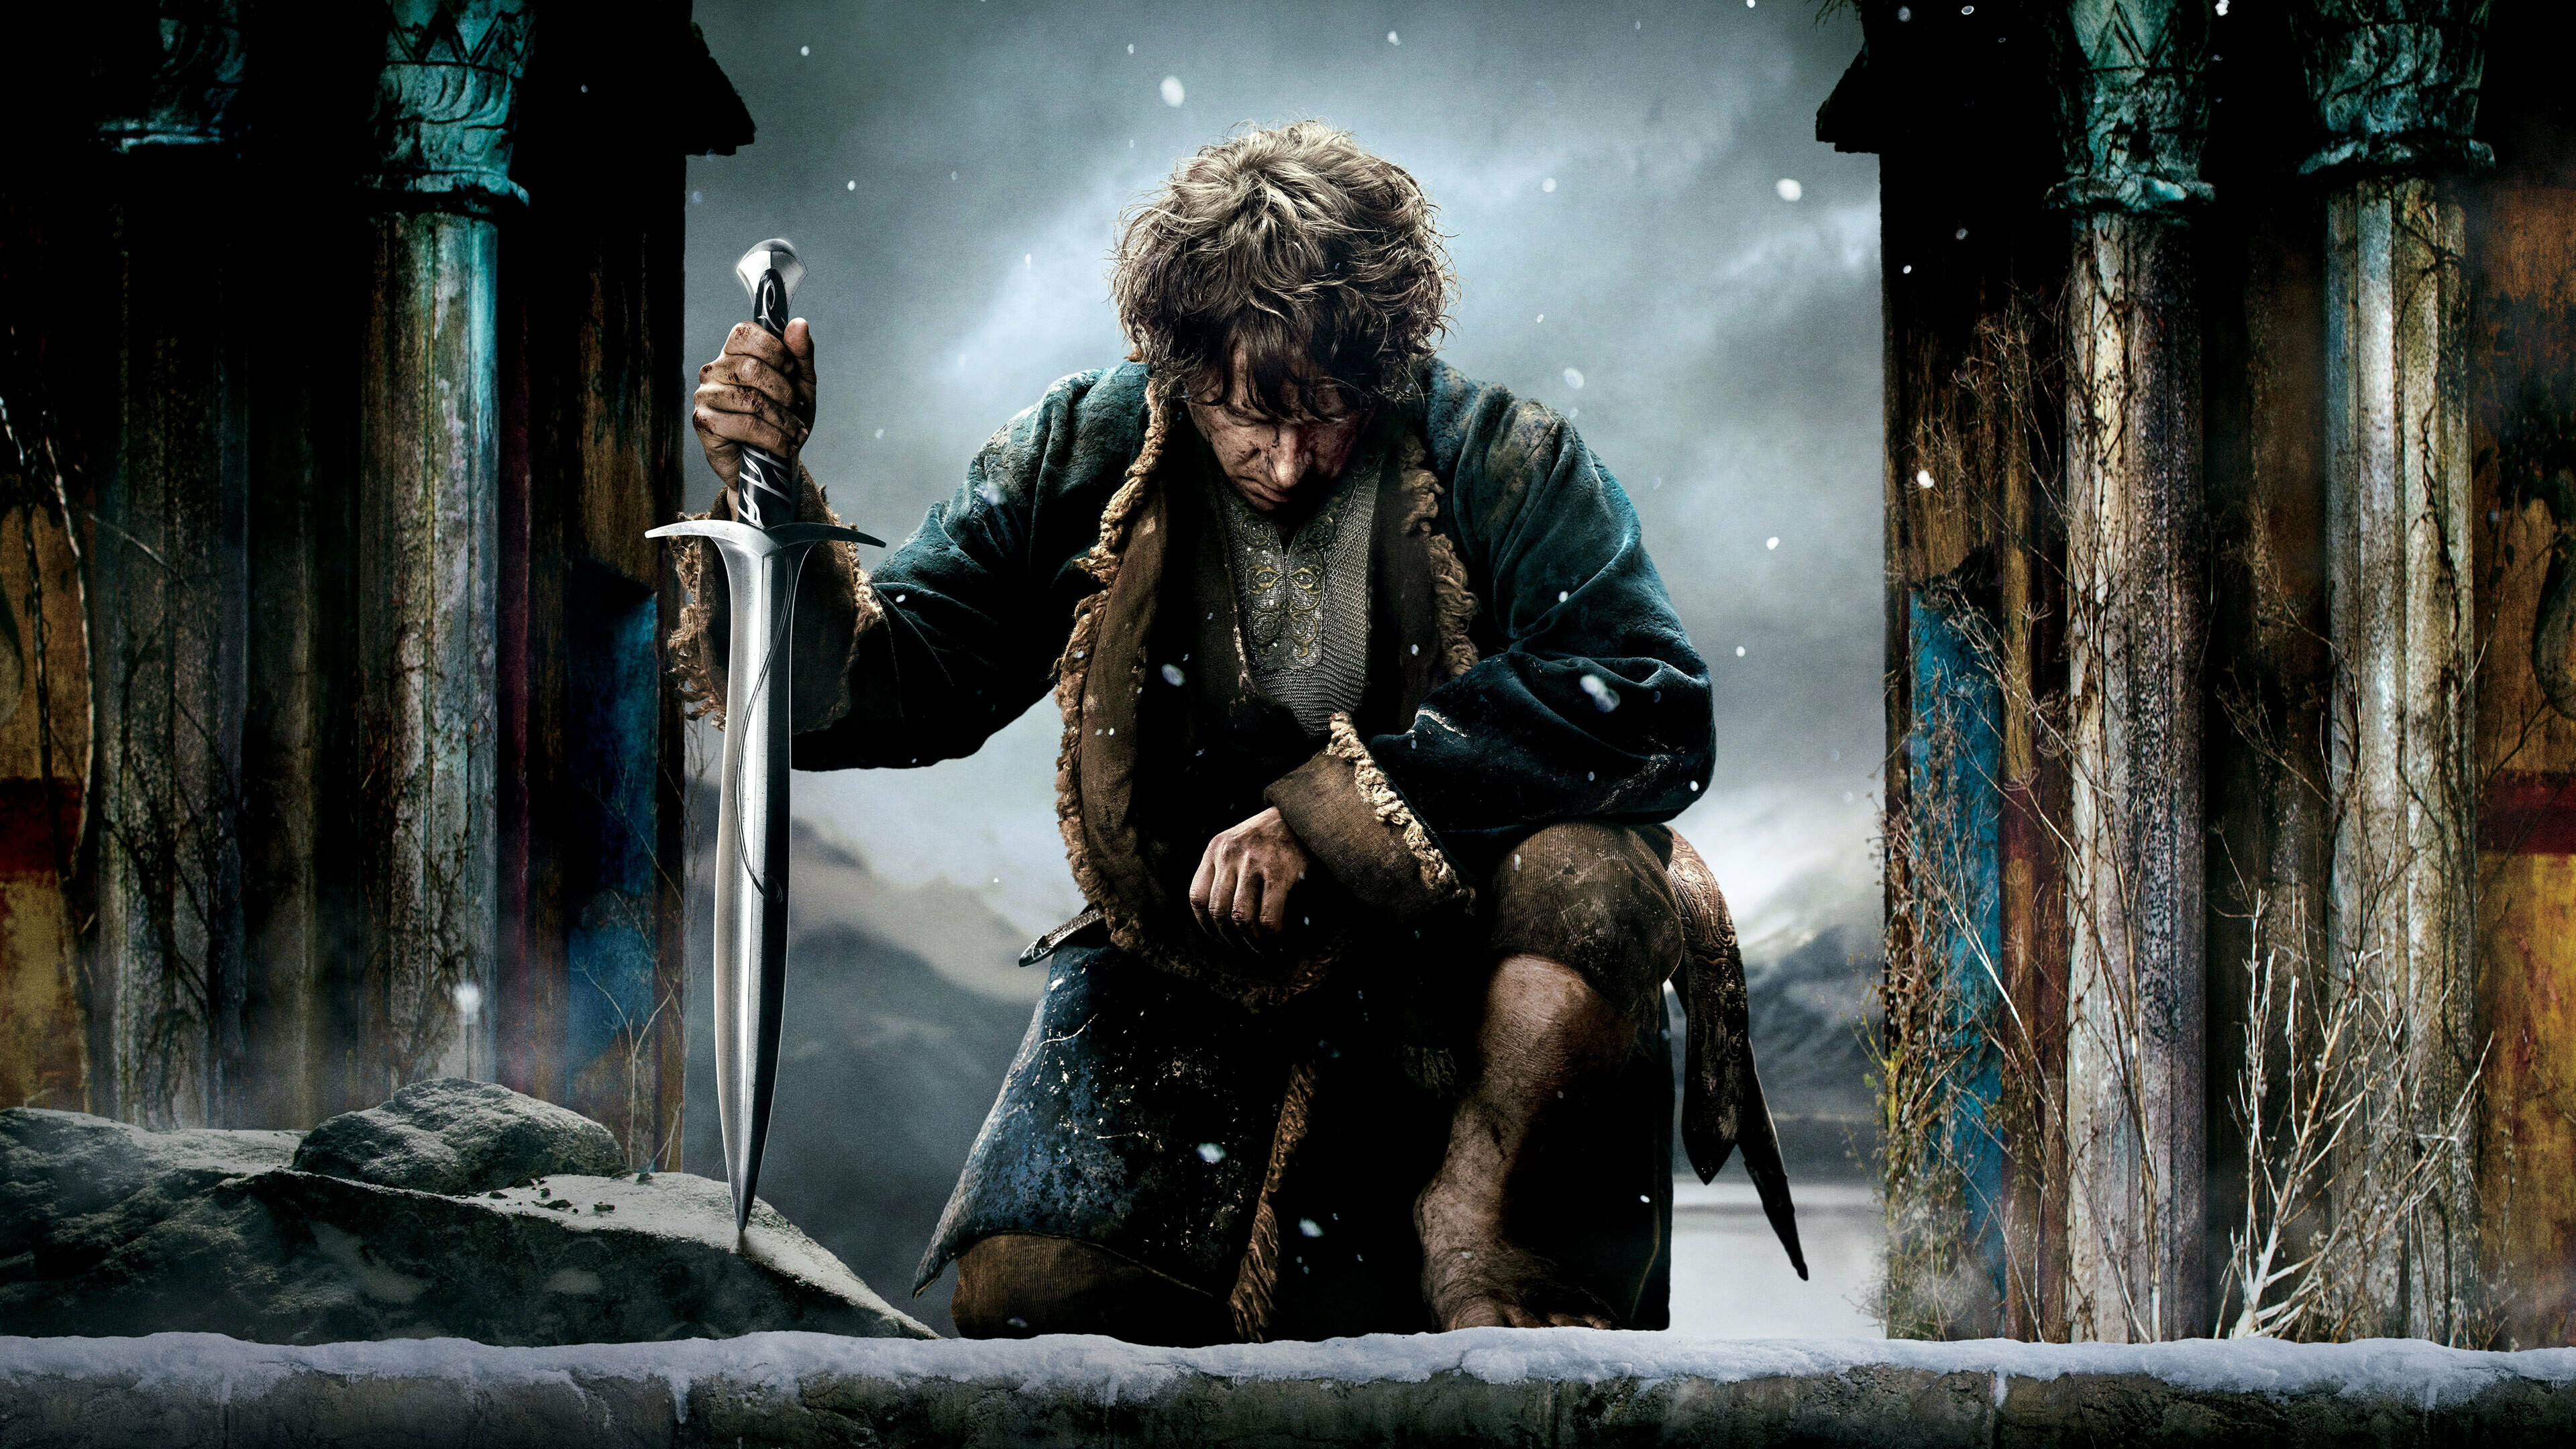 The Hobbit: The Battle of the Five Armies, A 2014 epic high fantasy adventure film directed by Peter Jackson. 3840x2160 4K Wallpaper.